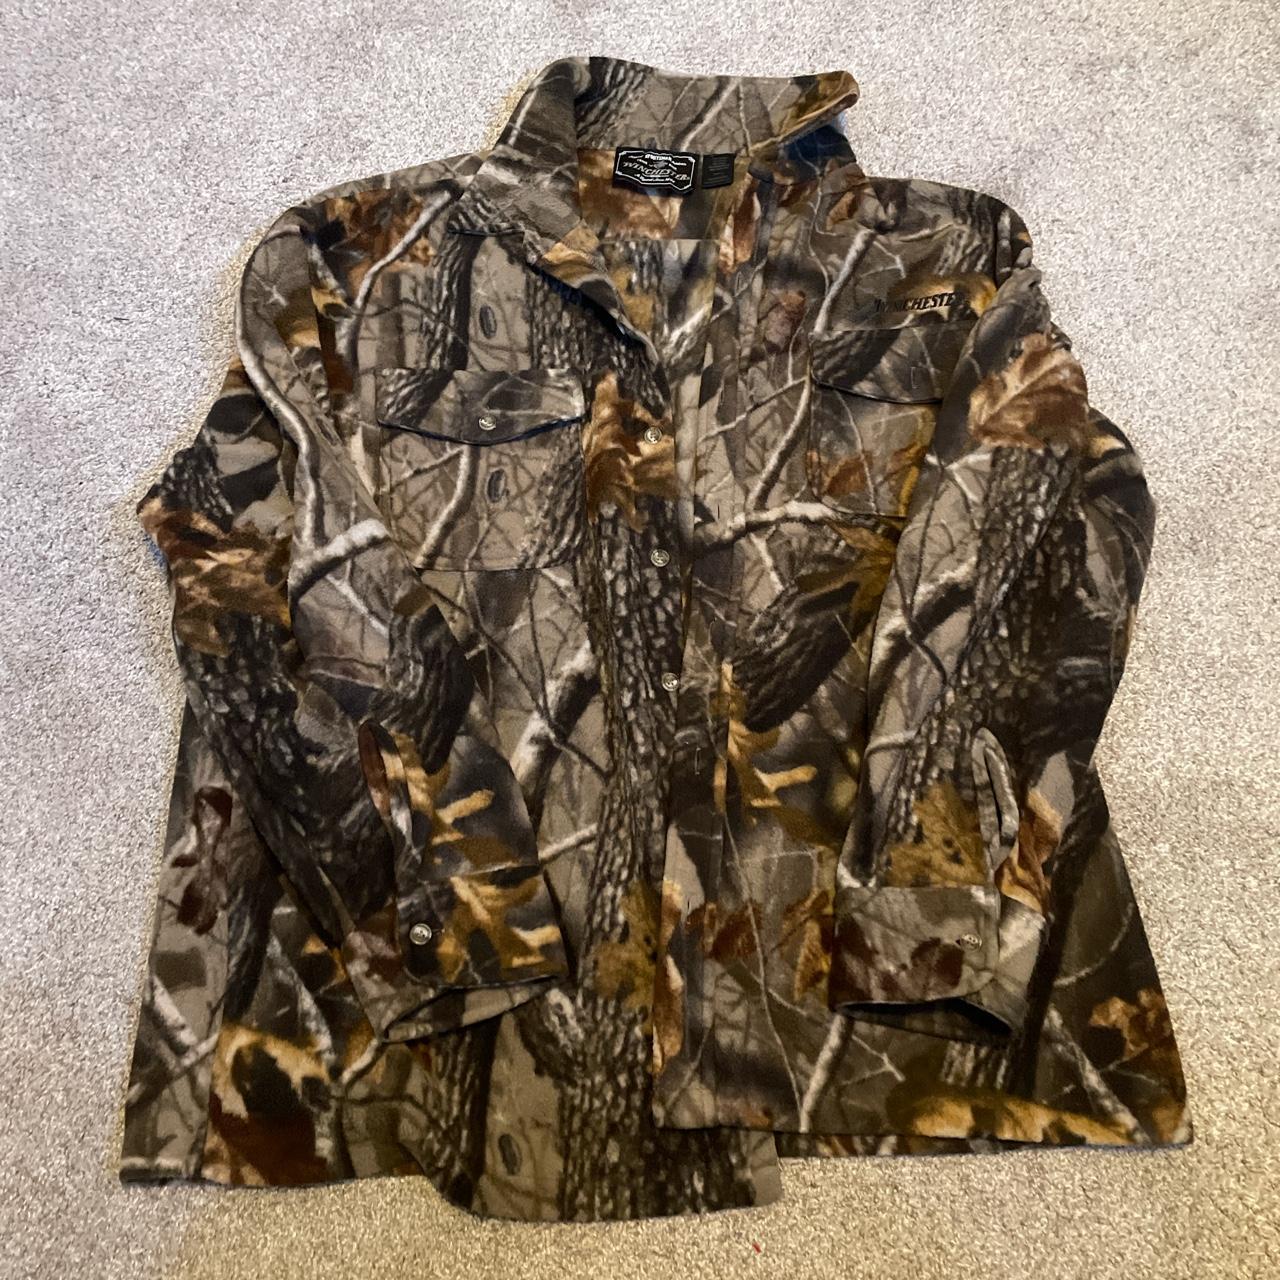 winchester camo button shirt size xlarge 2 AVAILABLE - Depop